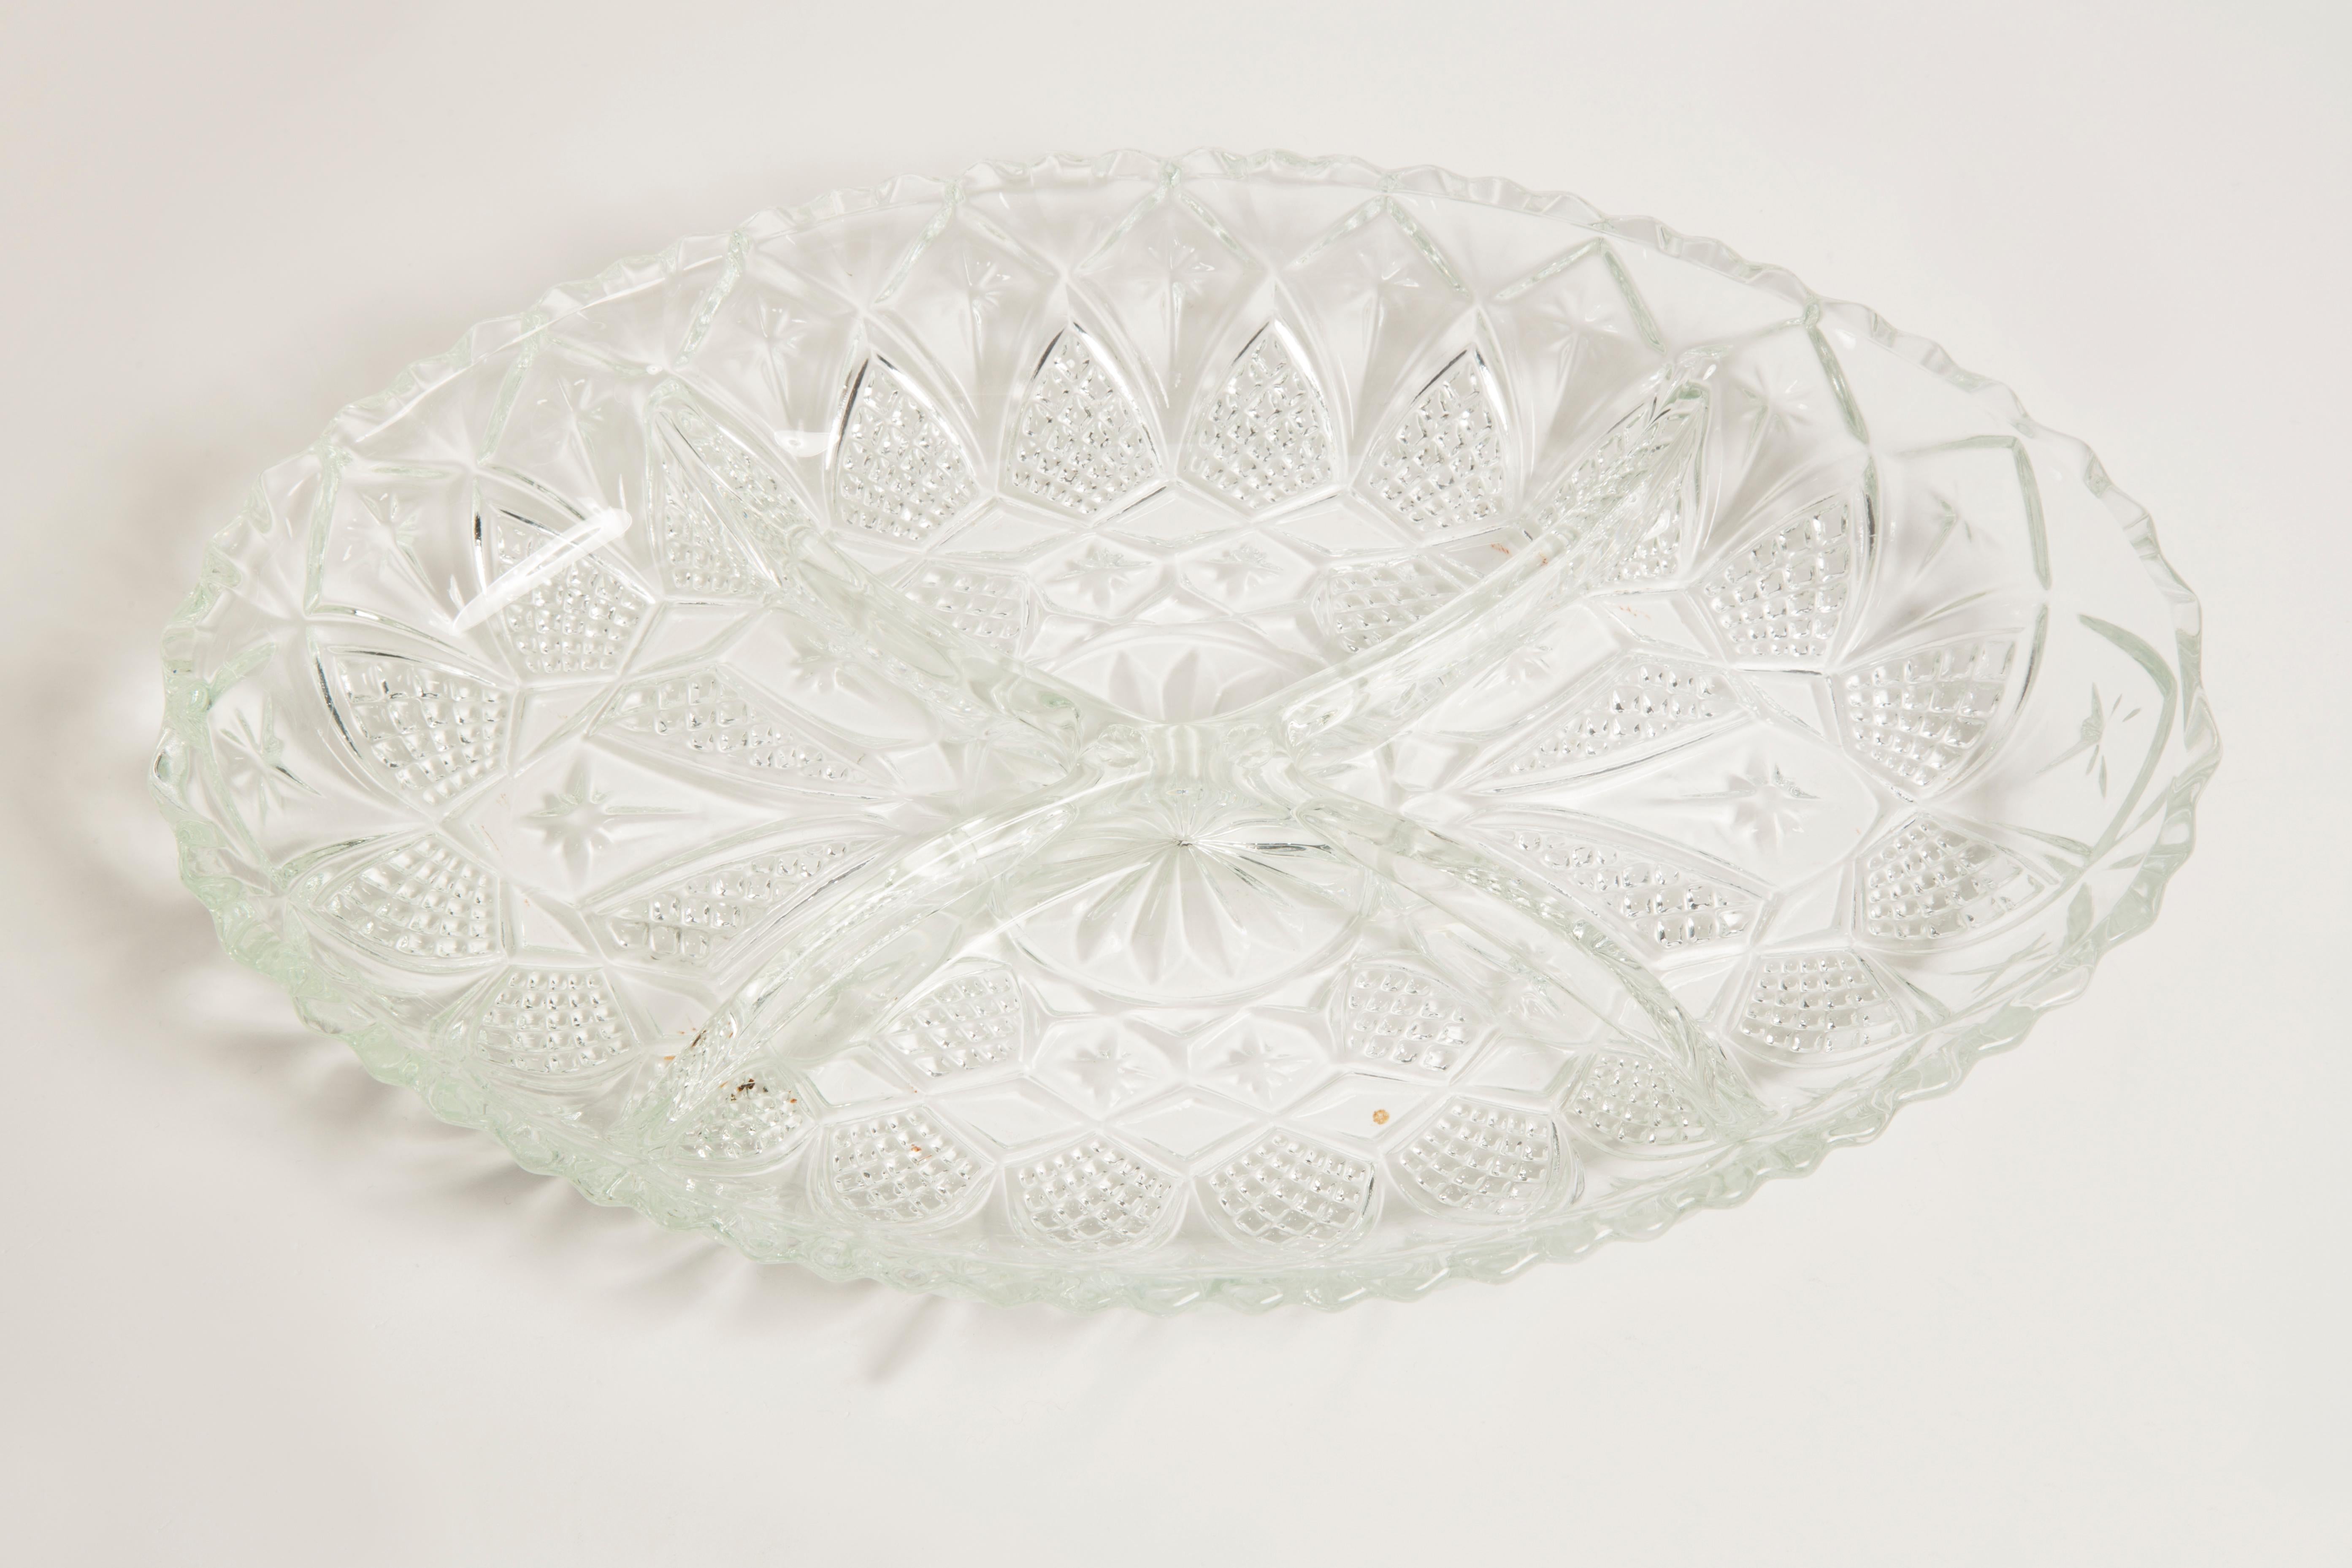 Ceramic Vintage Transparent Decorative Crystal Glass Plate, Italy, 1960s For Sale